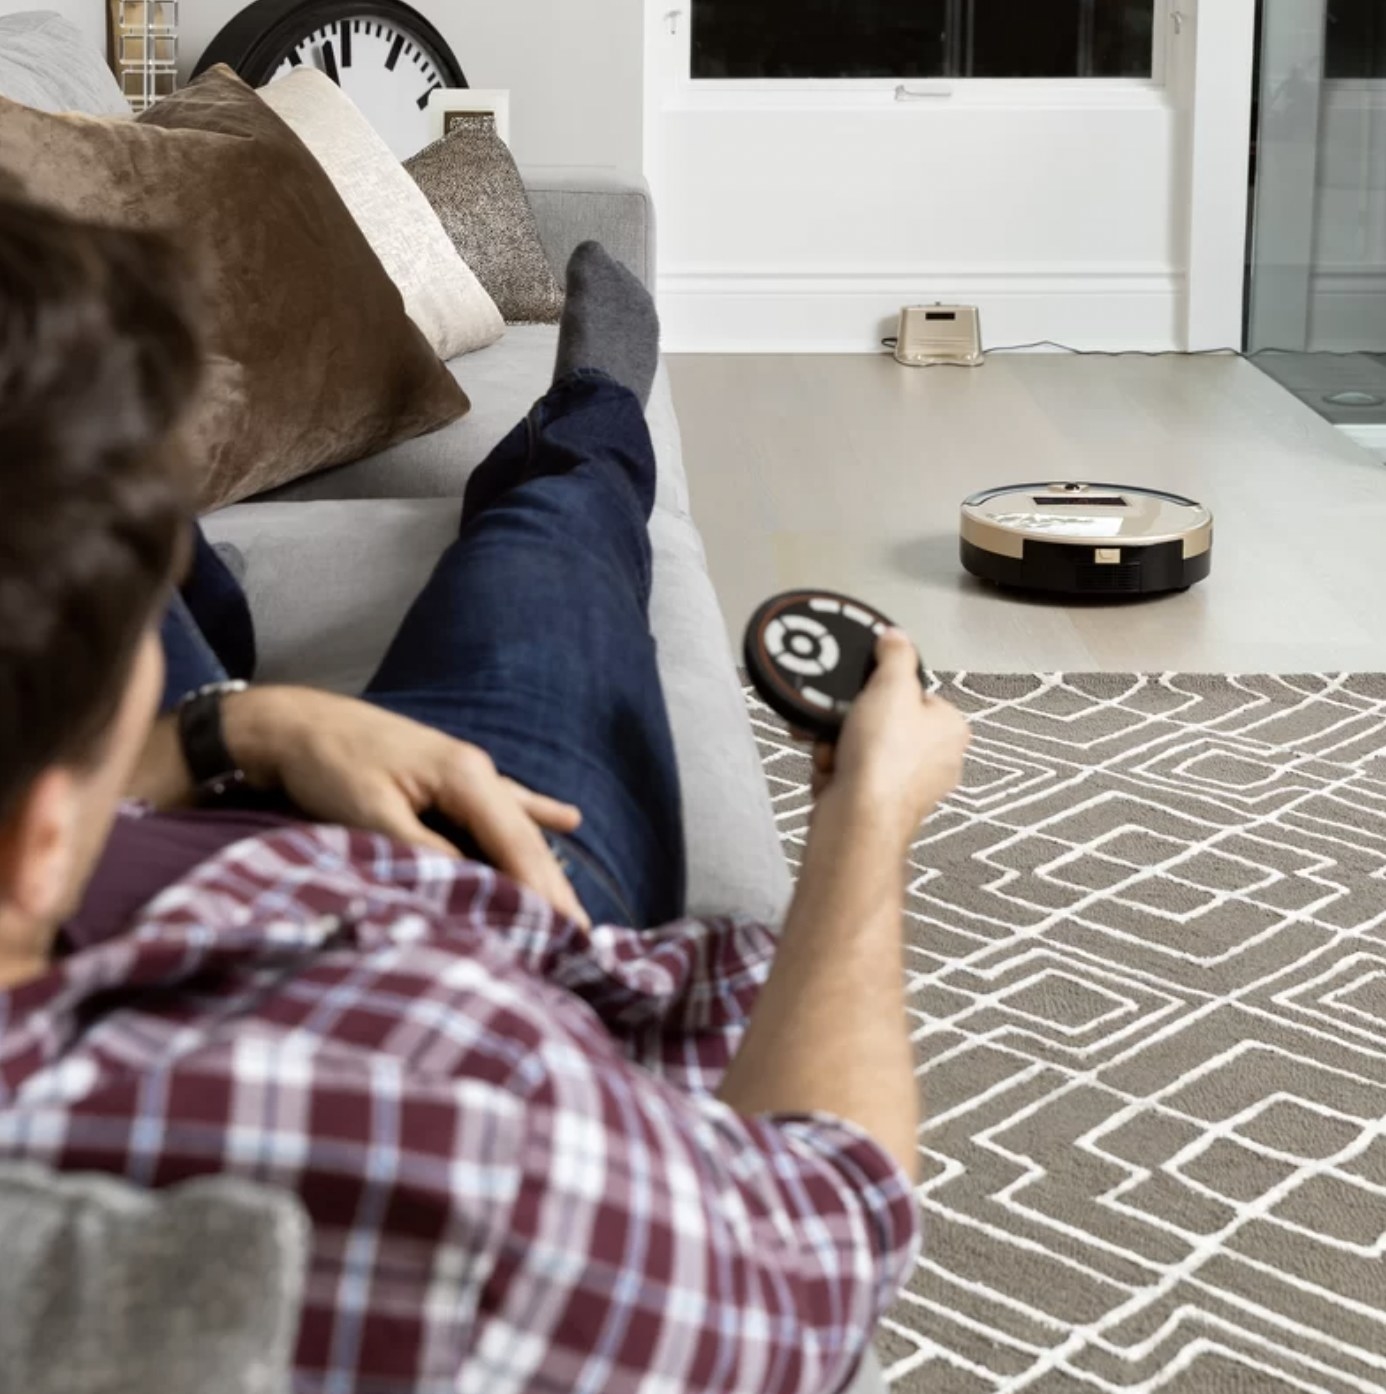 Model lounging on couch and using the remote to direct the robot vacuum on the floor